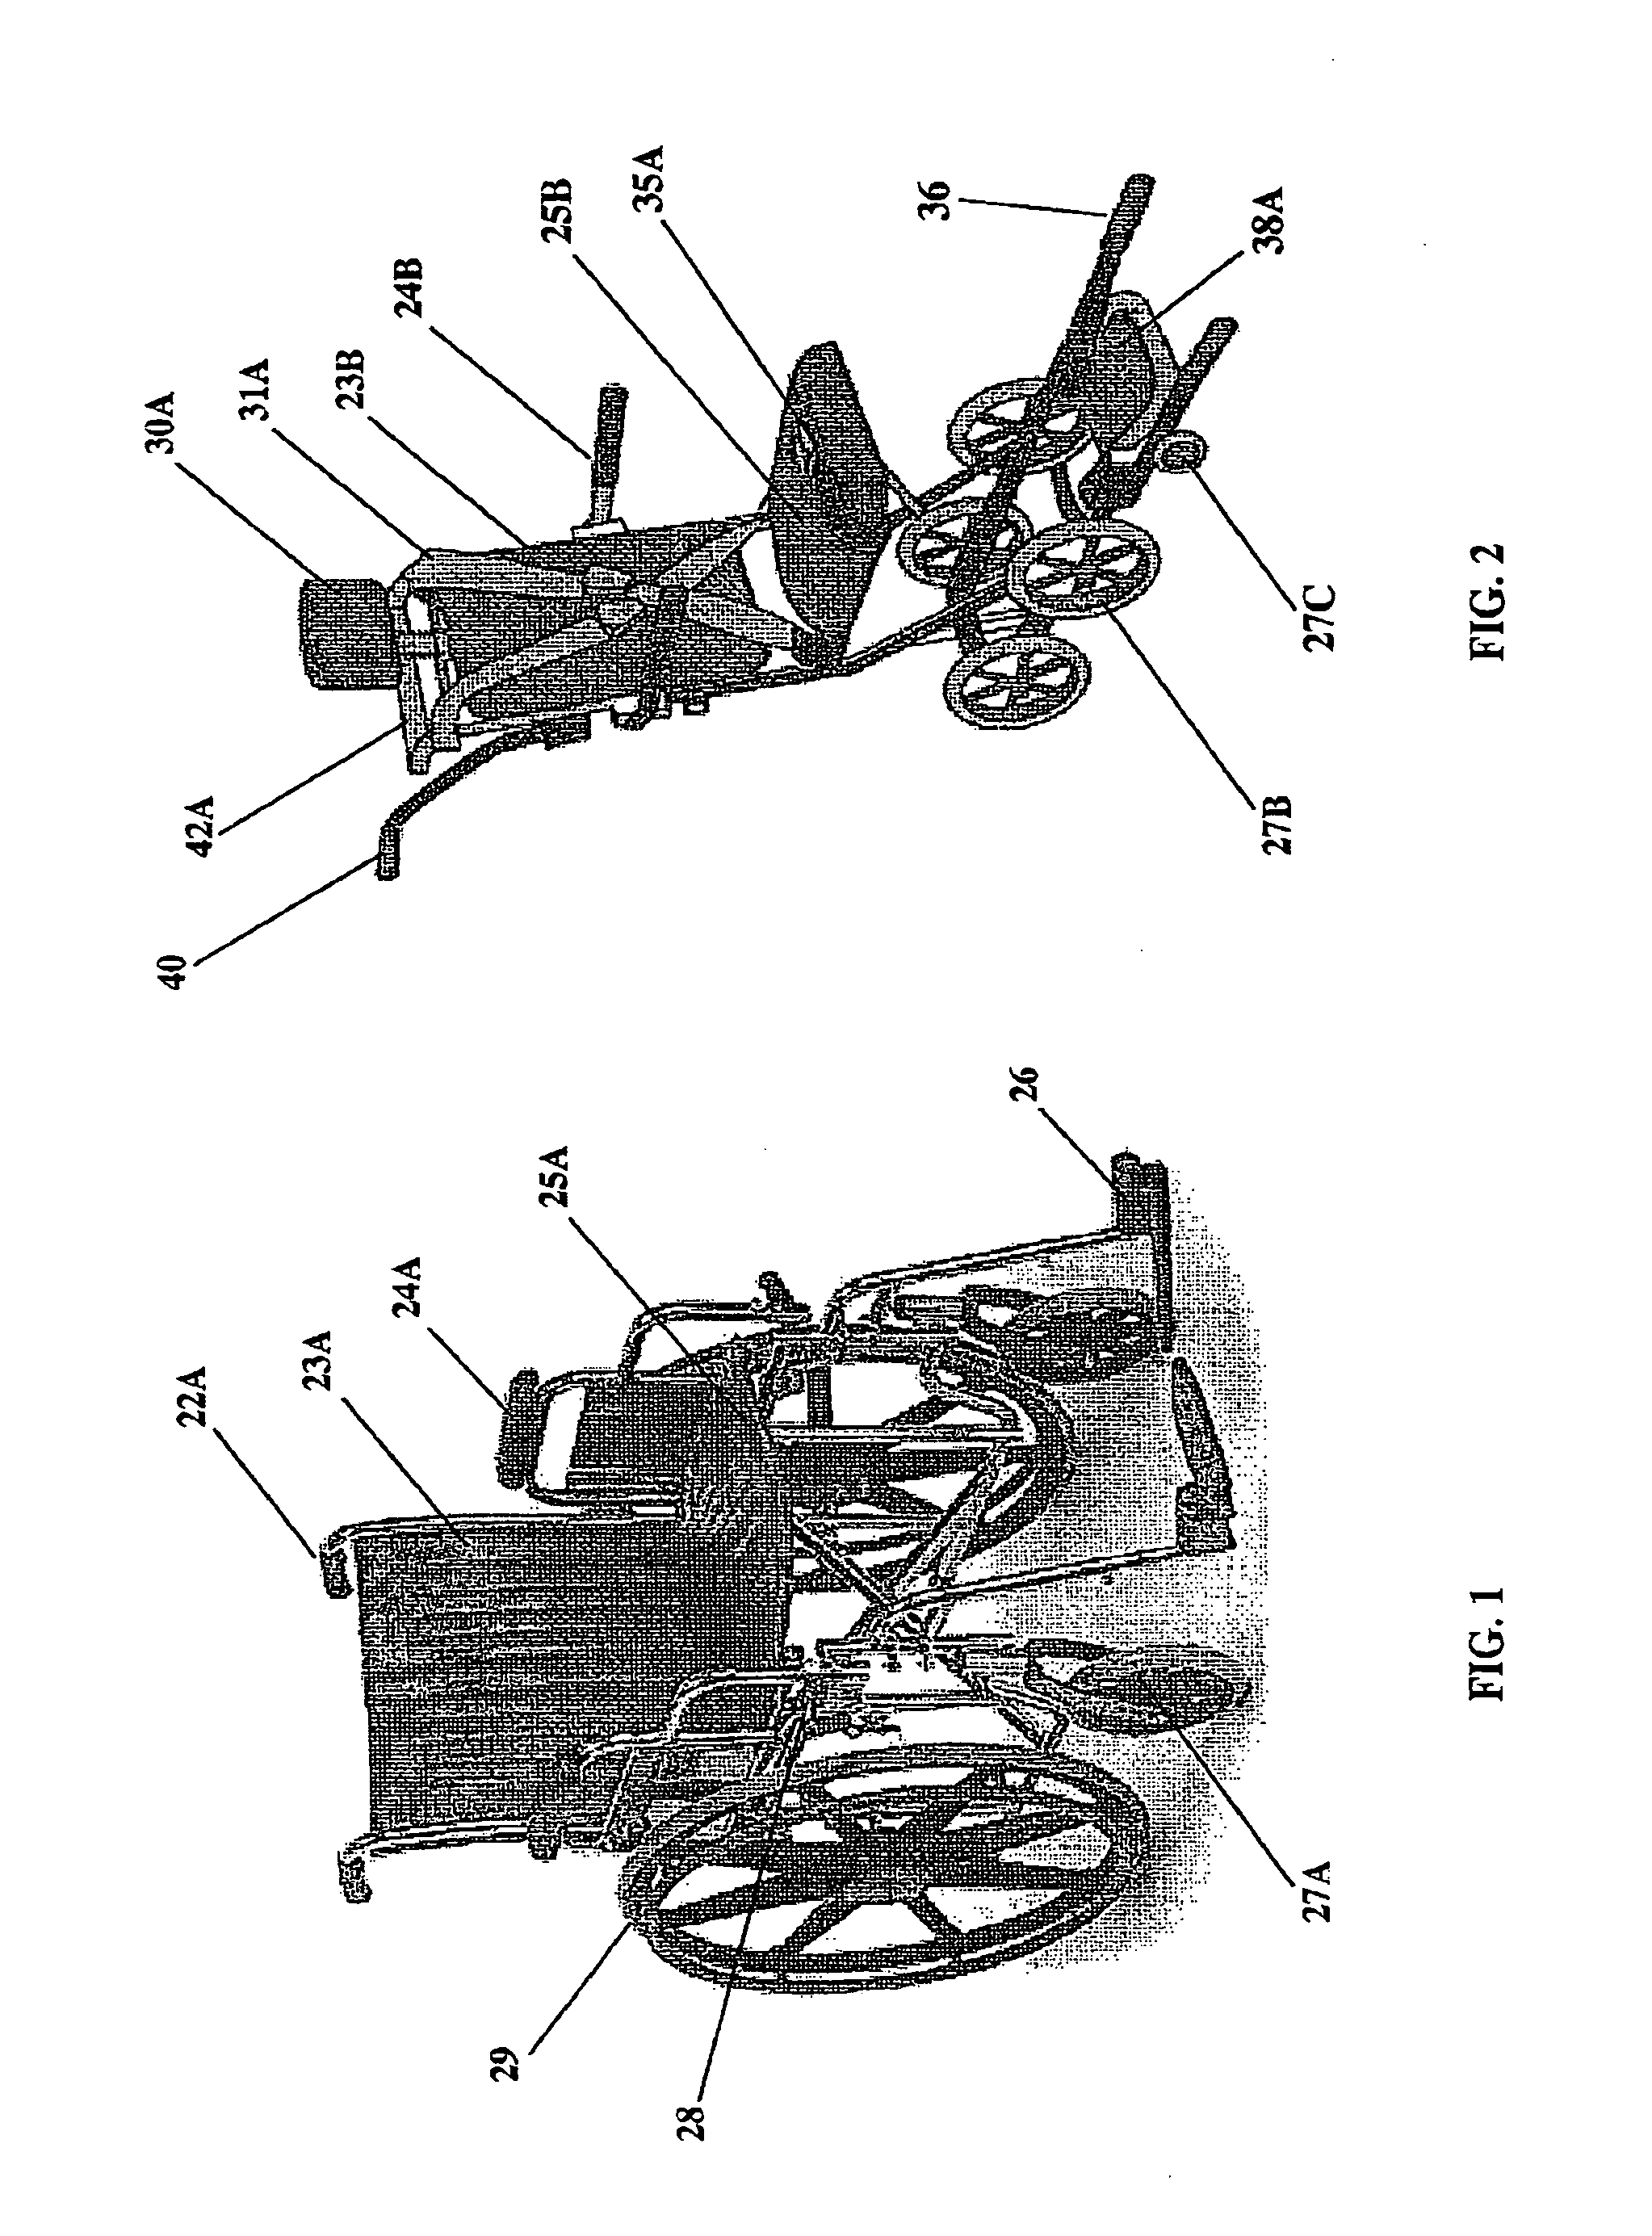 System and method for integrating handicapped accessible seats into aircraft interior configurations